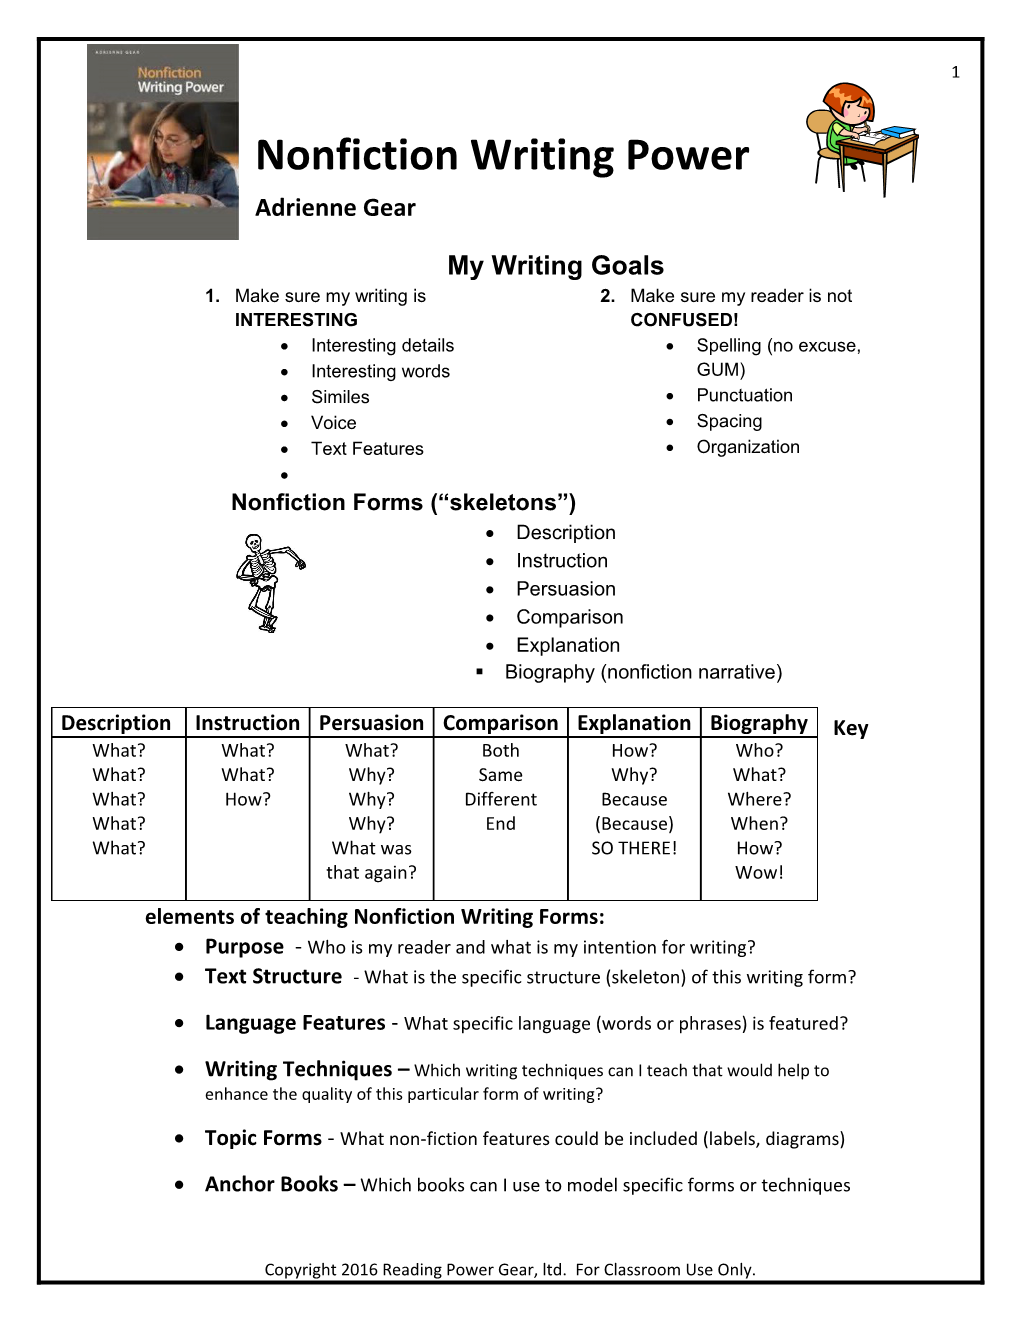 Nonfiction Writing Power